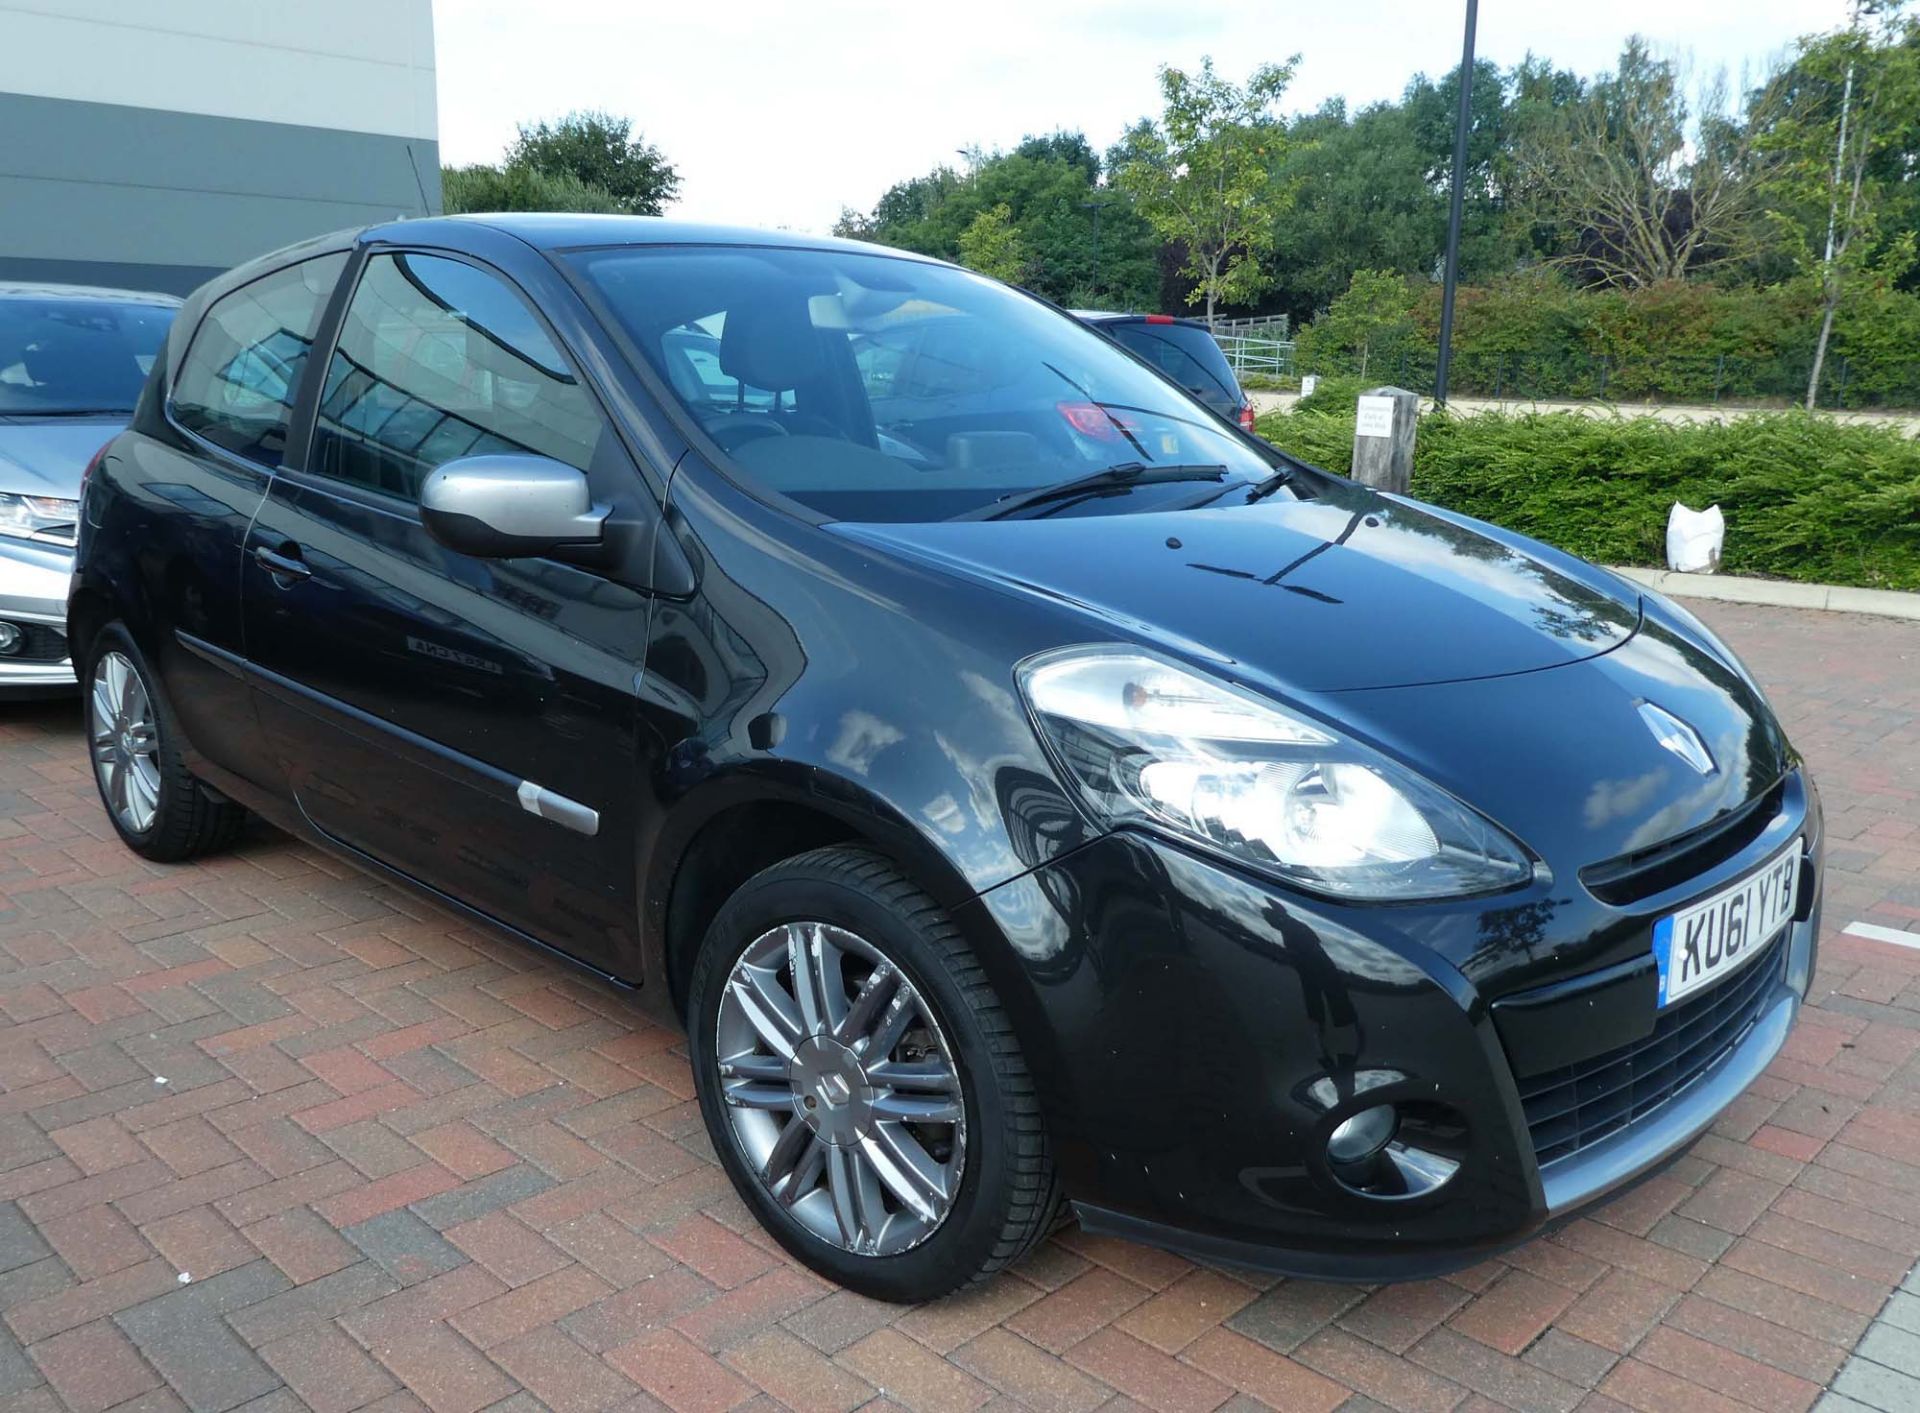 KU61 YTB Renault Clio Dynamique Tomtom 16v in black, first registered 26.09.2011, one key, 1149cc, - Image 2 of 12